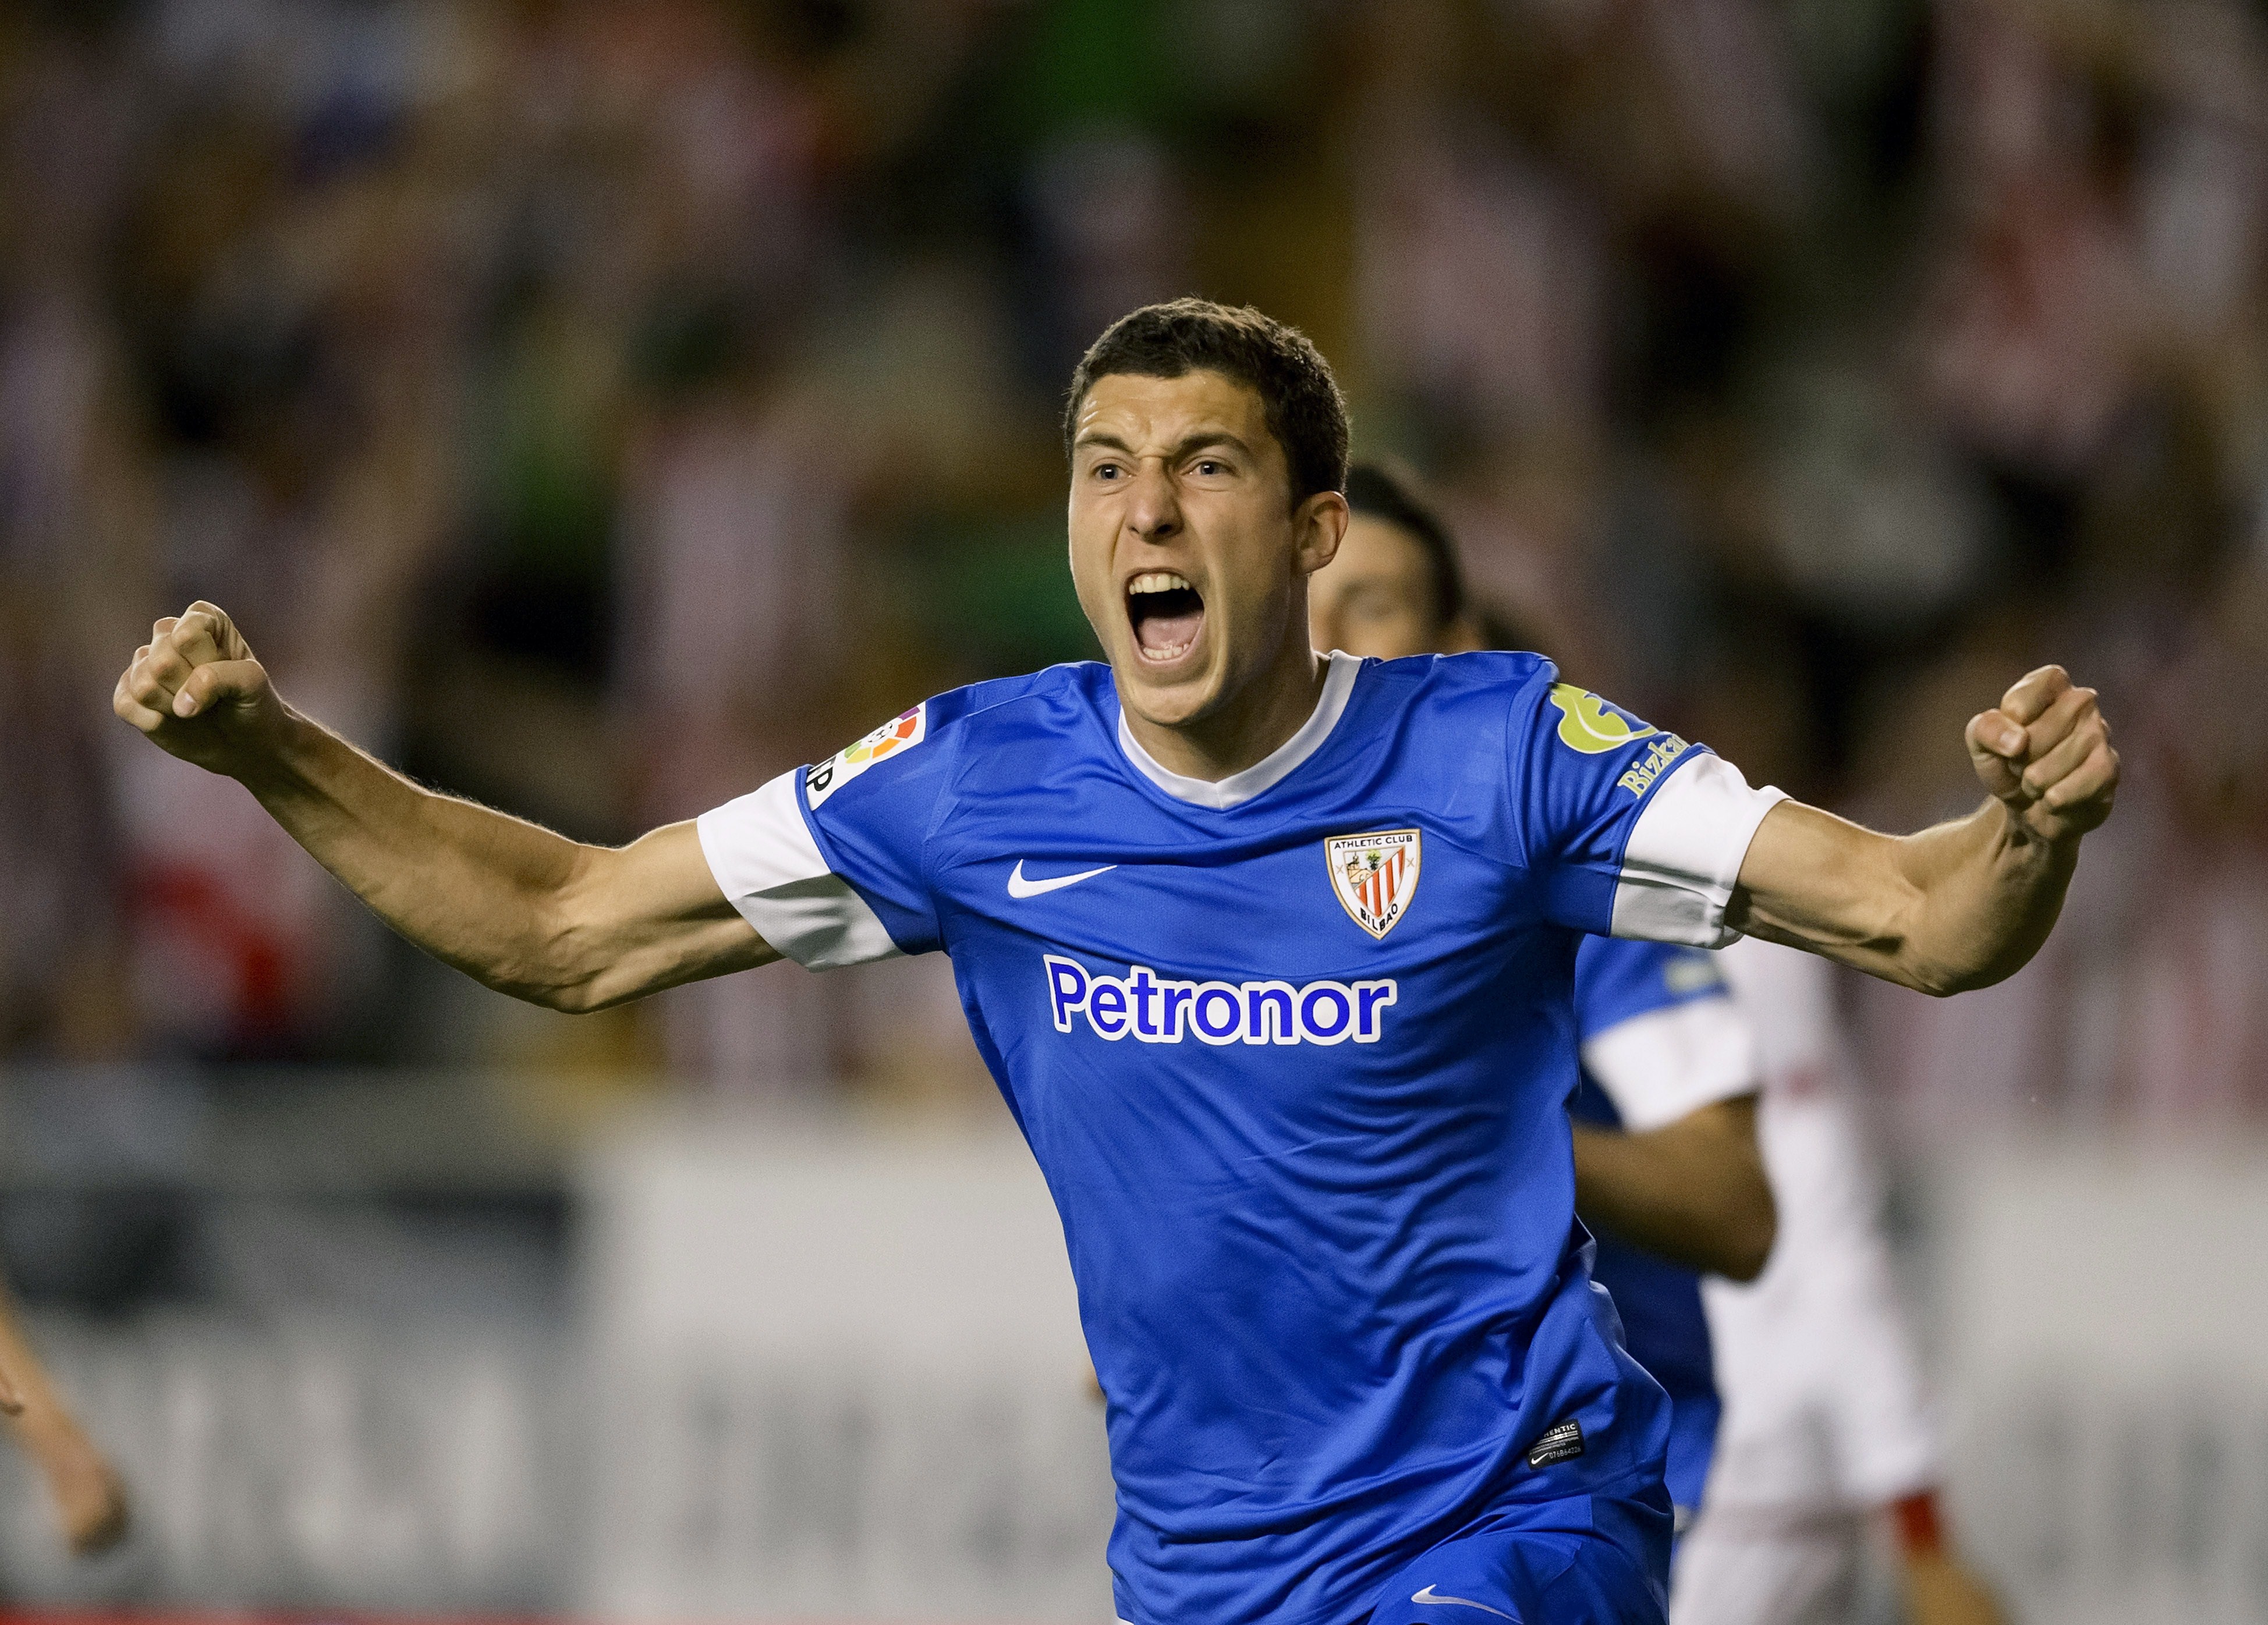 Athletic Bilbao's midfielder Oscar de Marcos celebrates after scoring during the Spanish league football match Rayo Vallecano vs Athletic de Bilbao at the Vallecas stadium in Madrid on May 2, 2014. AFP PHOTO/ DANI POZO        (Photo credit should read DANI POZO/AFP/Getty Images)